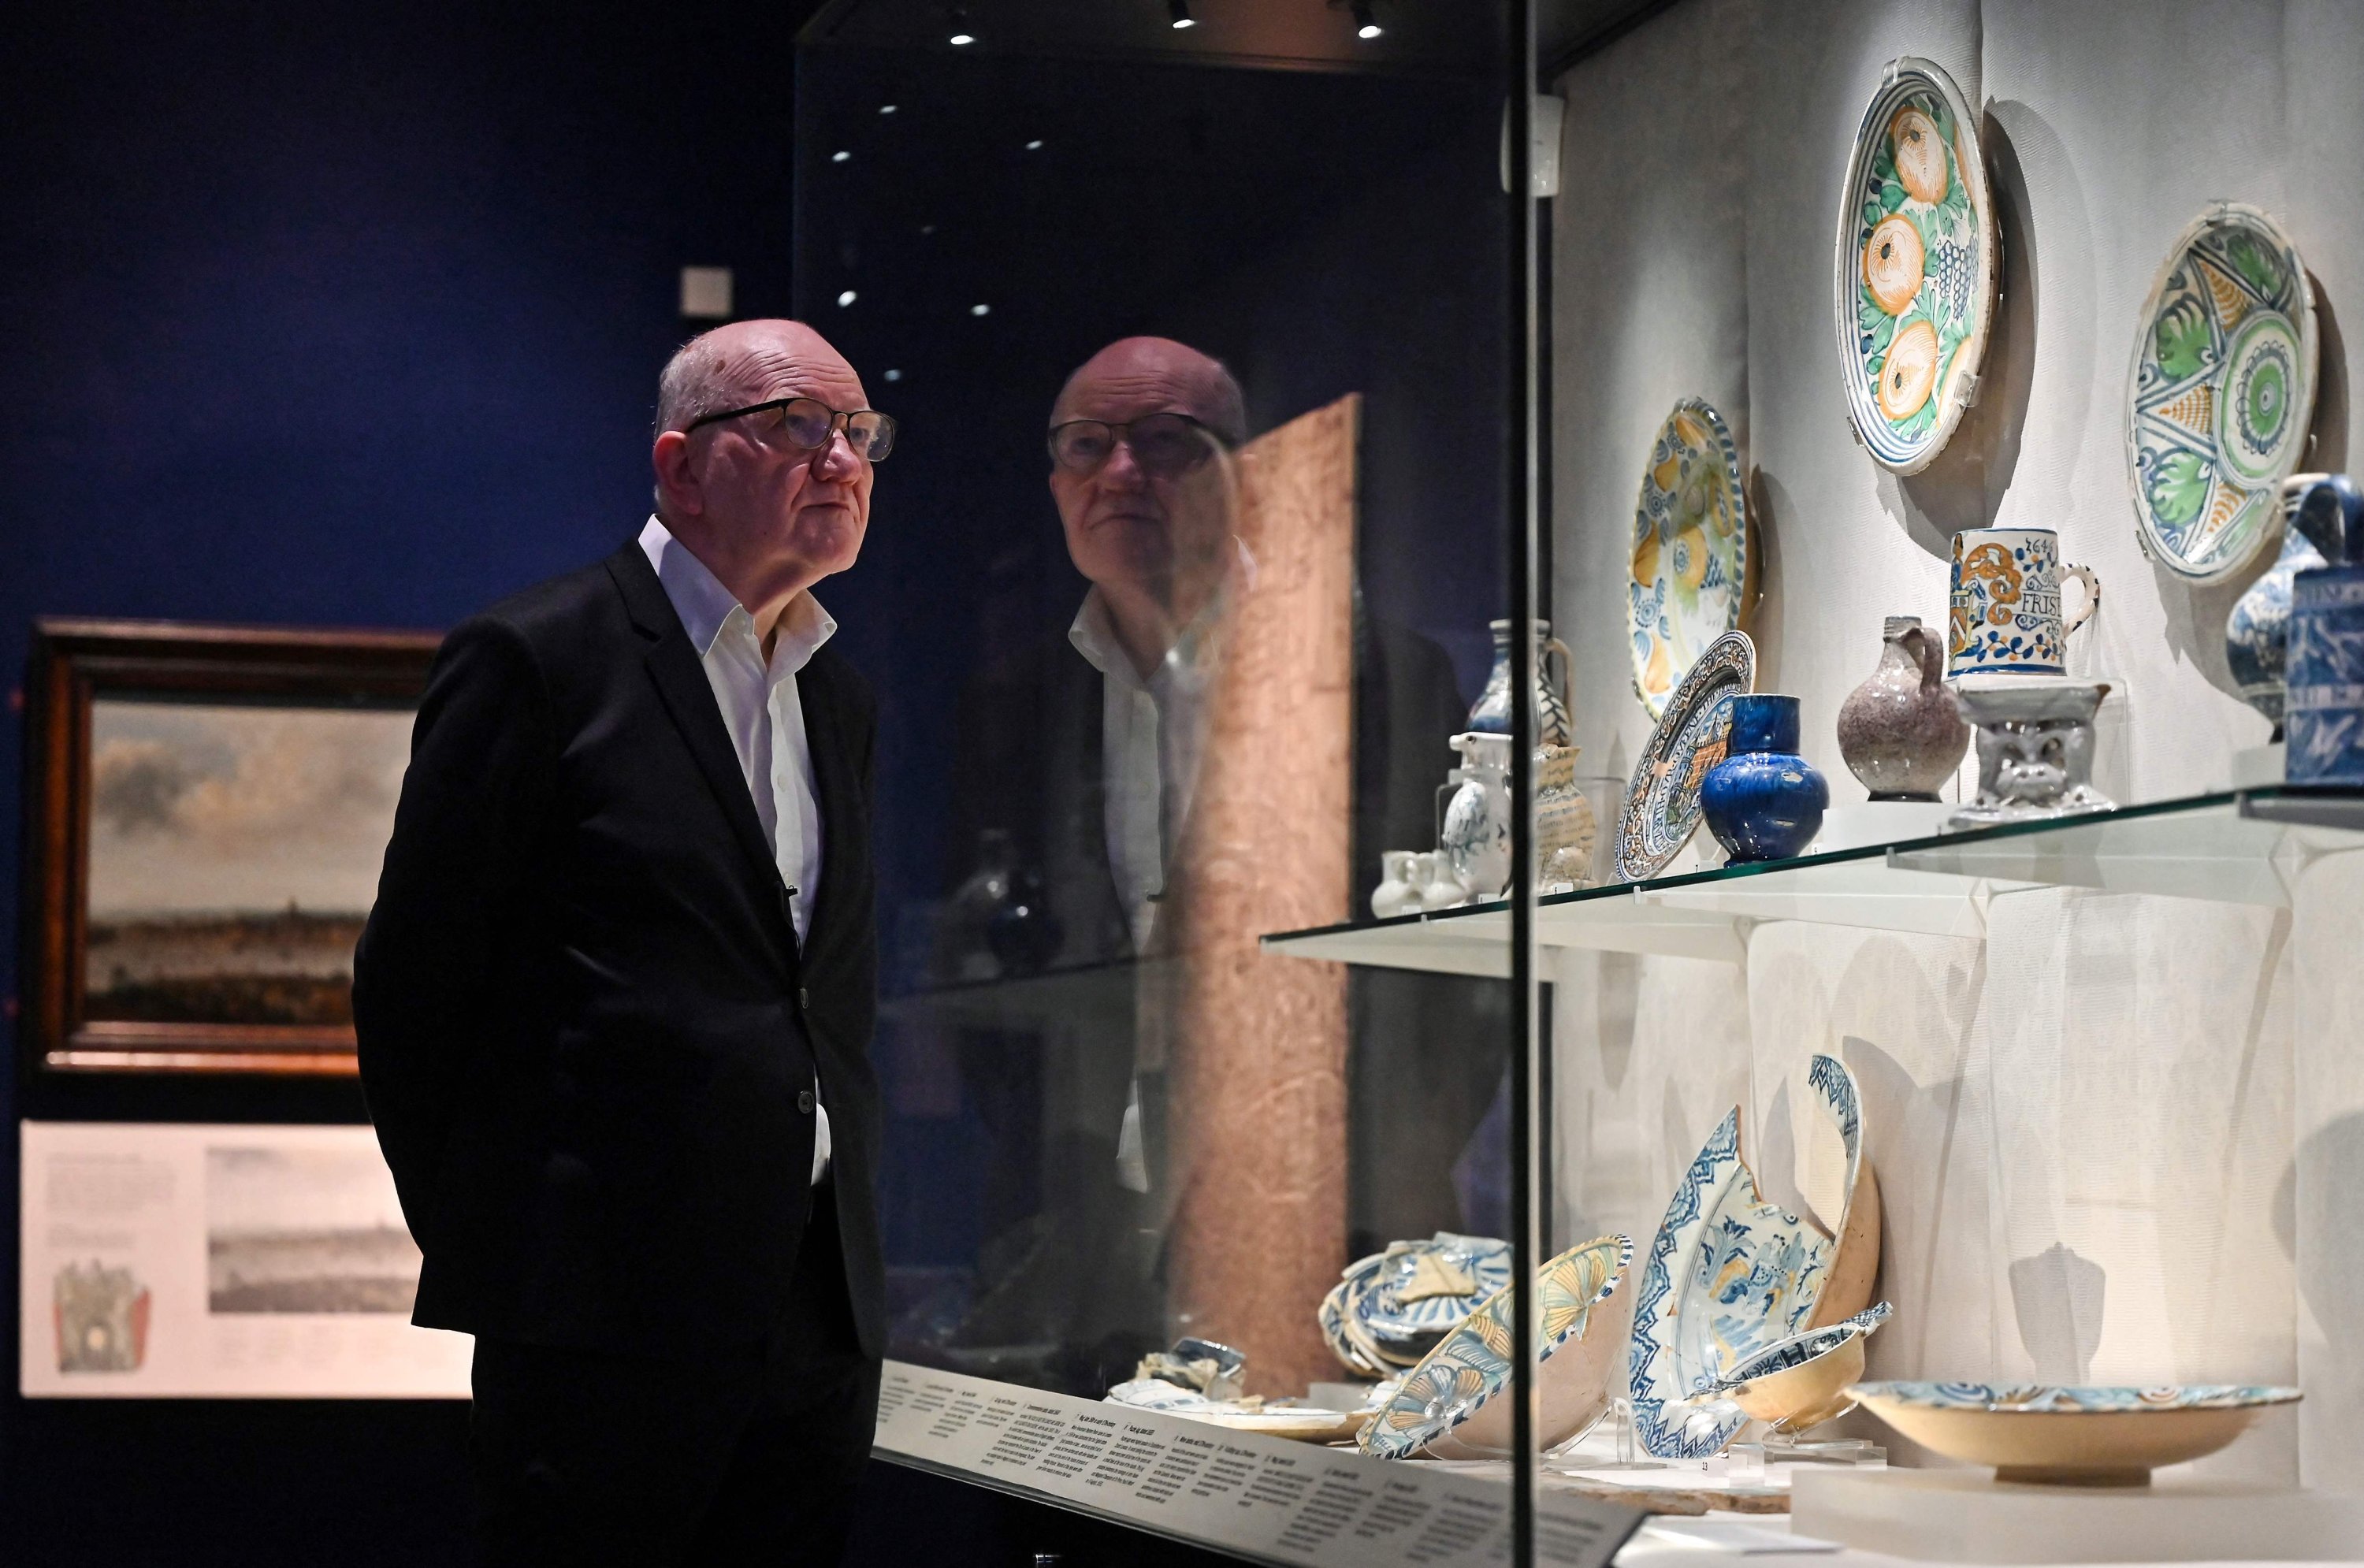 The London museum Director of Content Finbarr Whooley looks at a glass case displaying a set of ceramics objects at the Museum of London, London, U.K., Nov. 8, 2022. (AFP Photo)